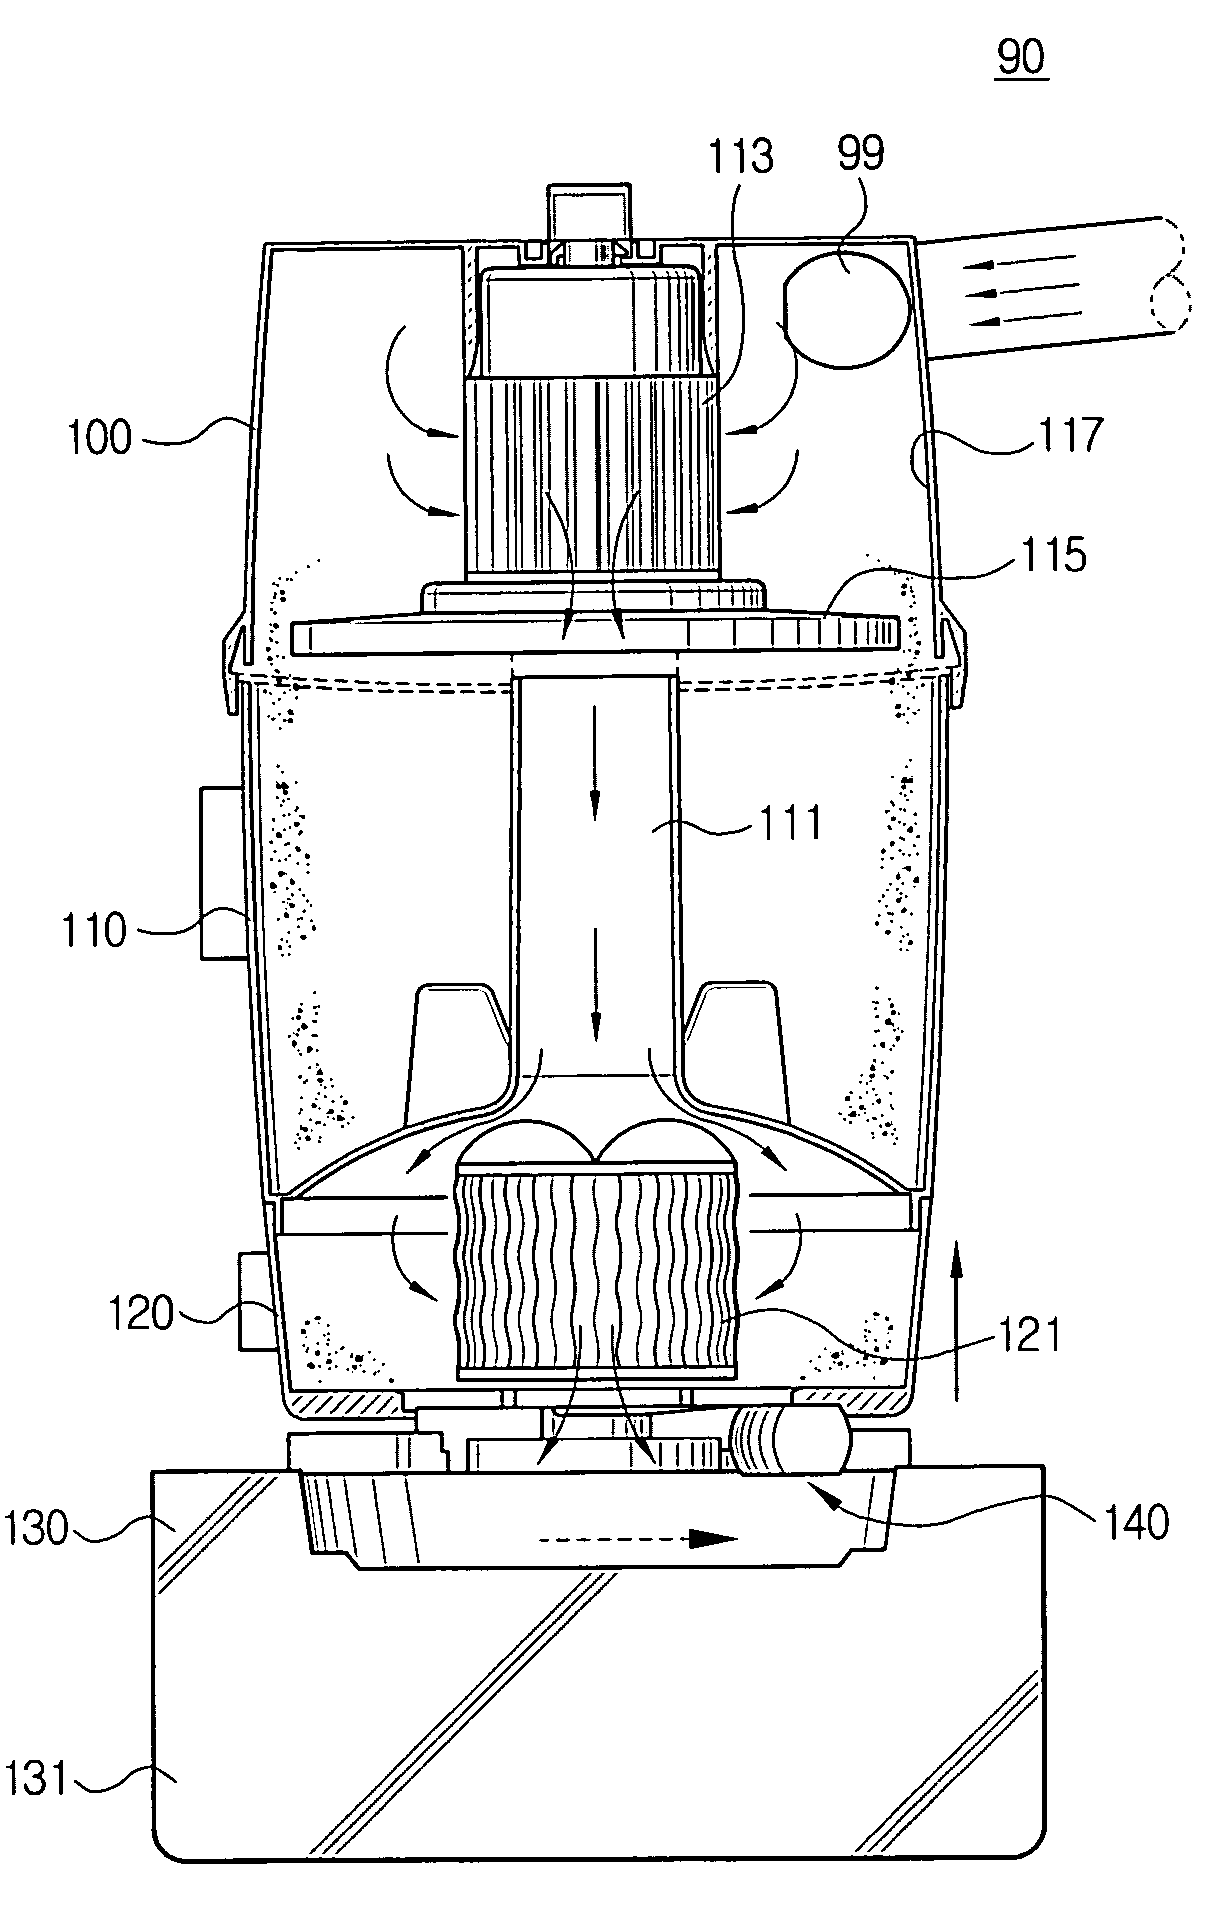 Attaching and detaching device for contaminant collecting receptacle of cyclone separator